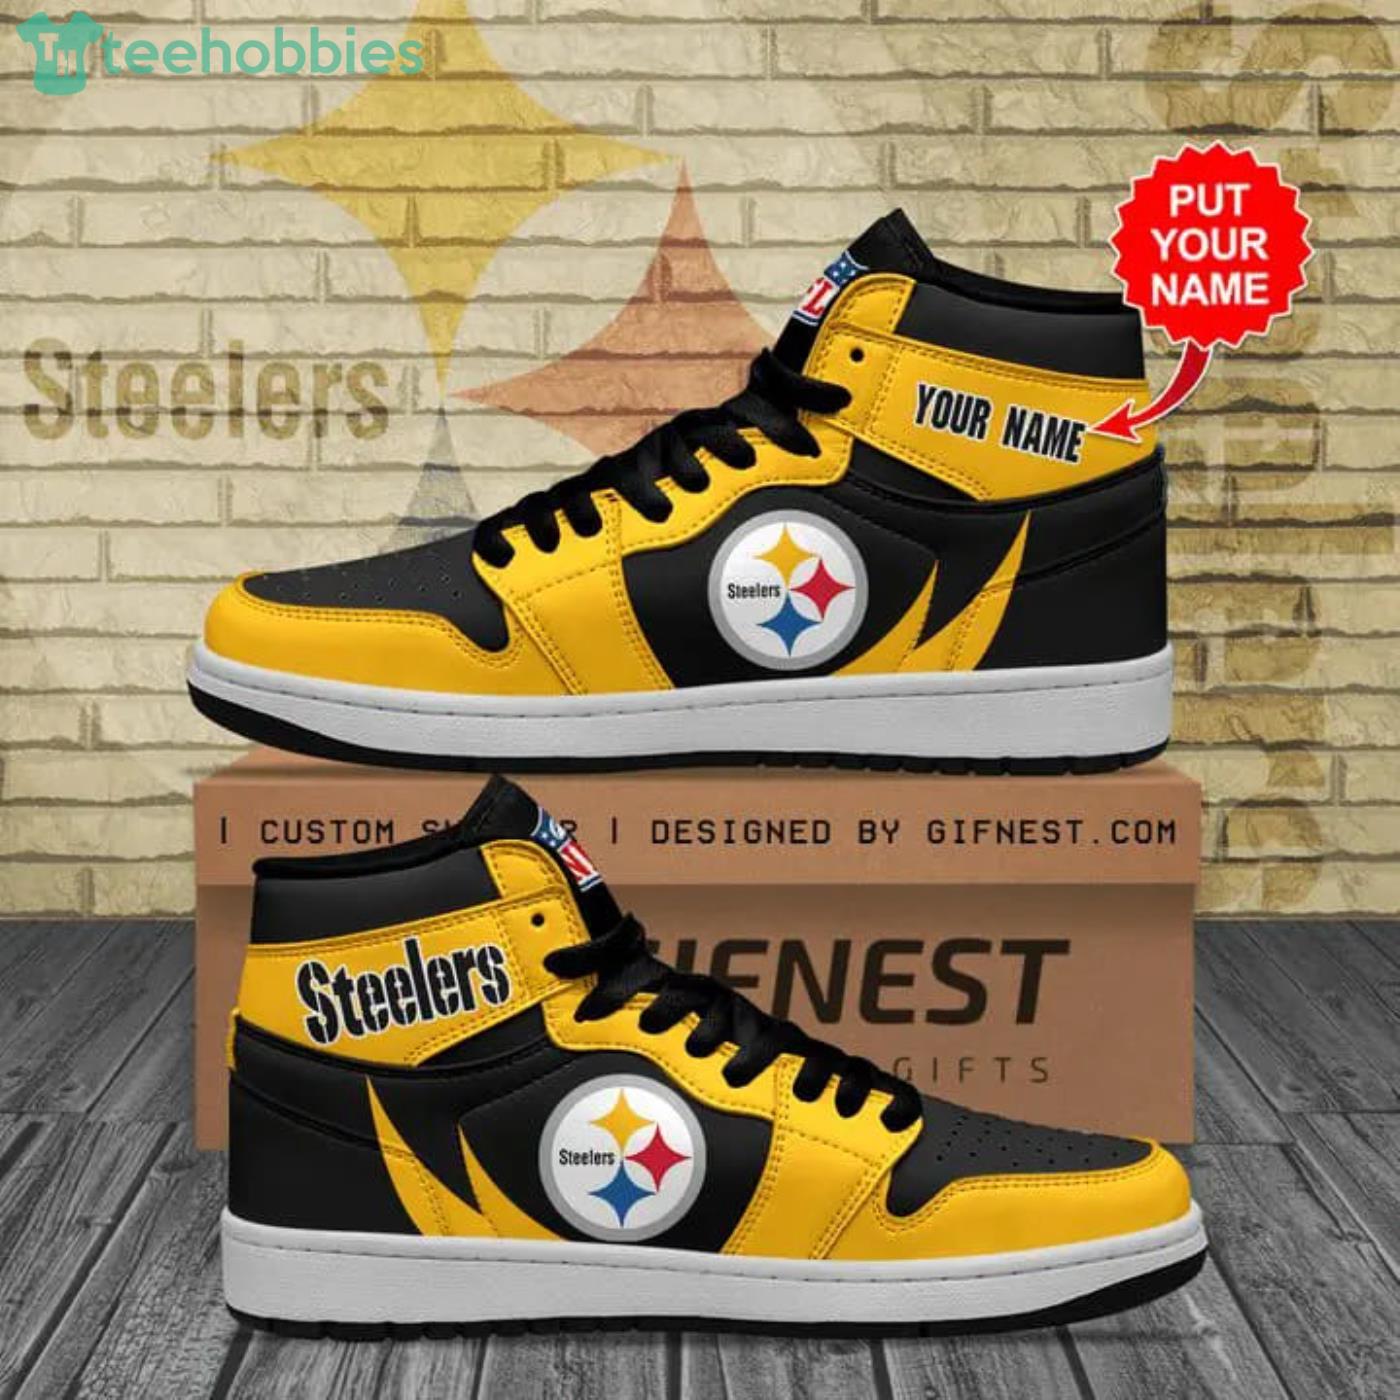 steelers items for sale